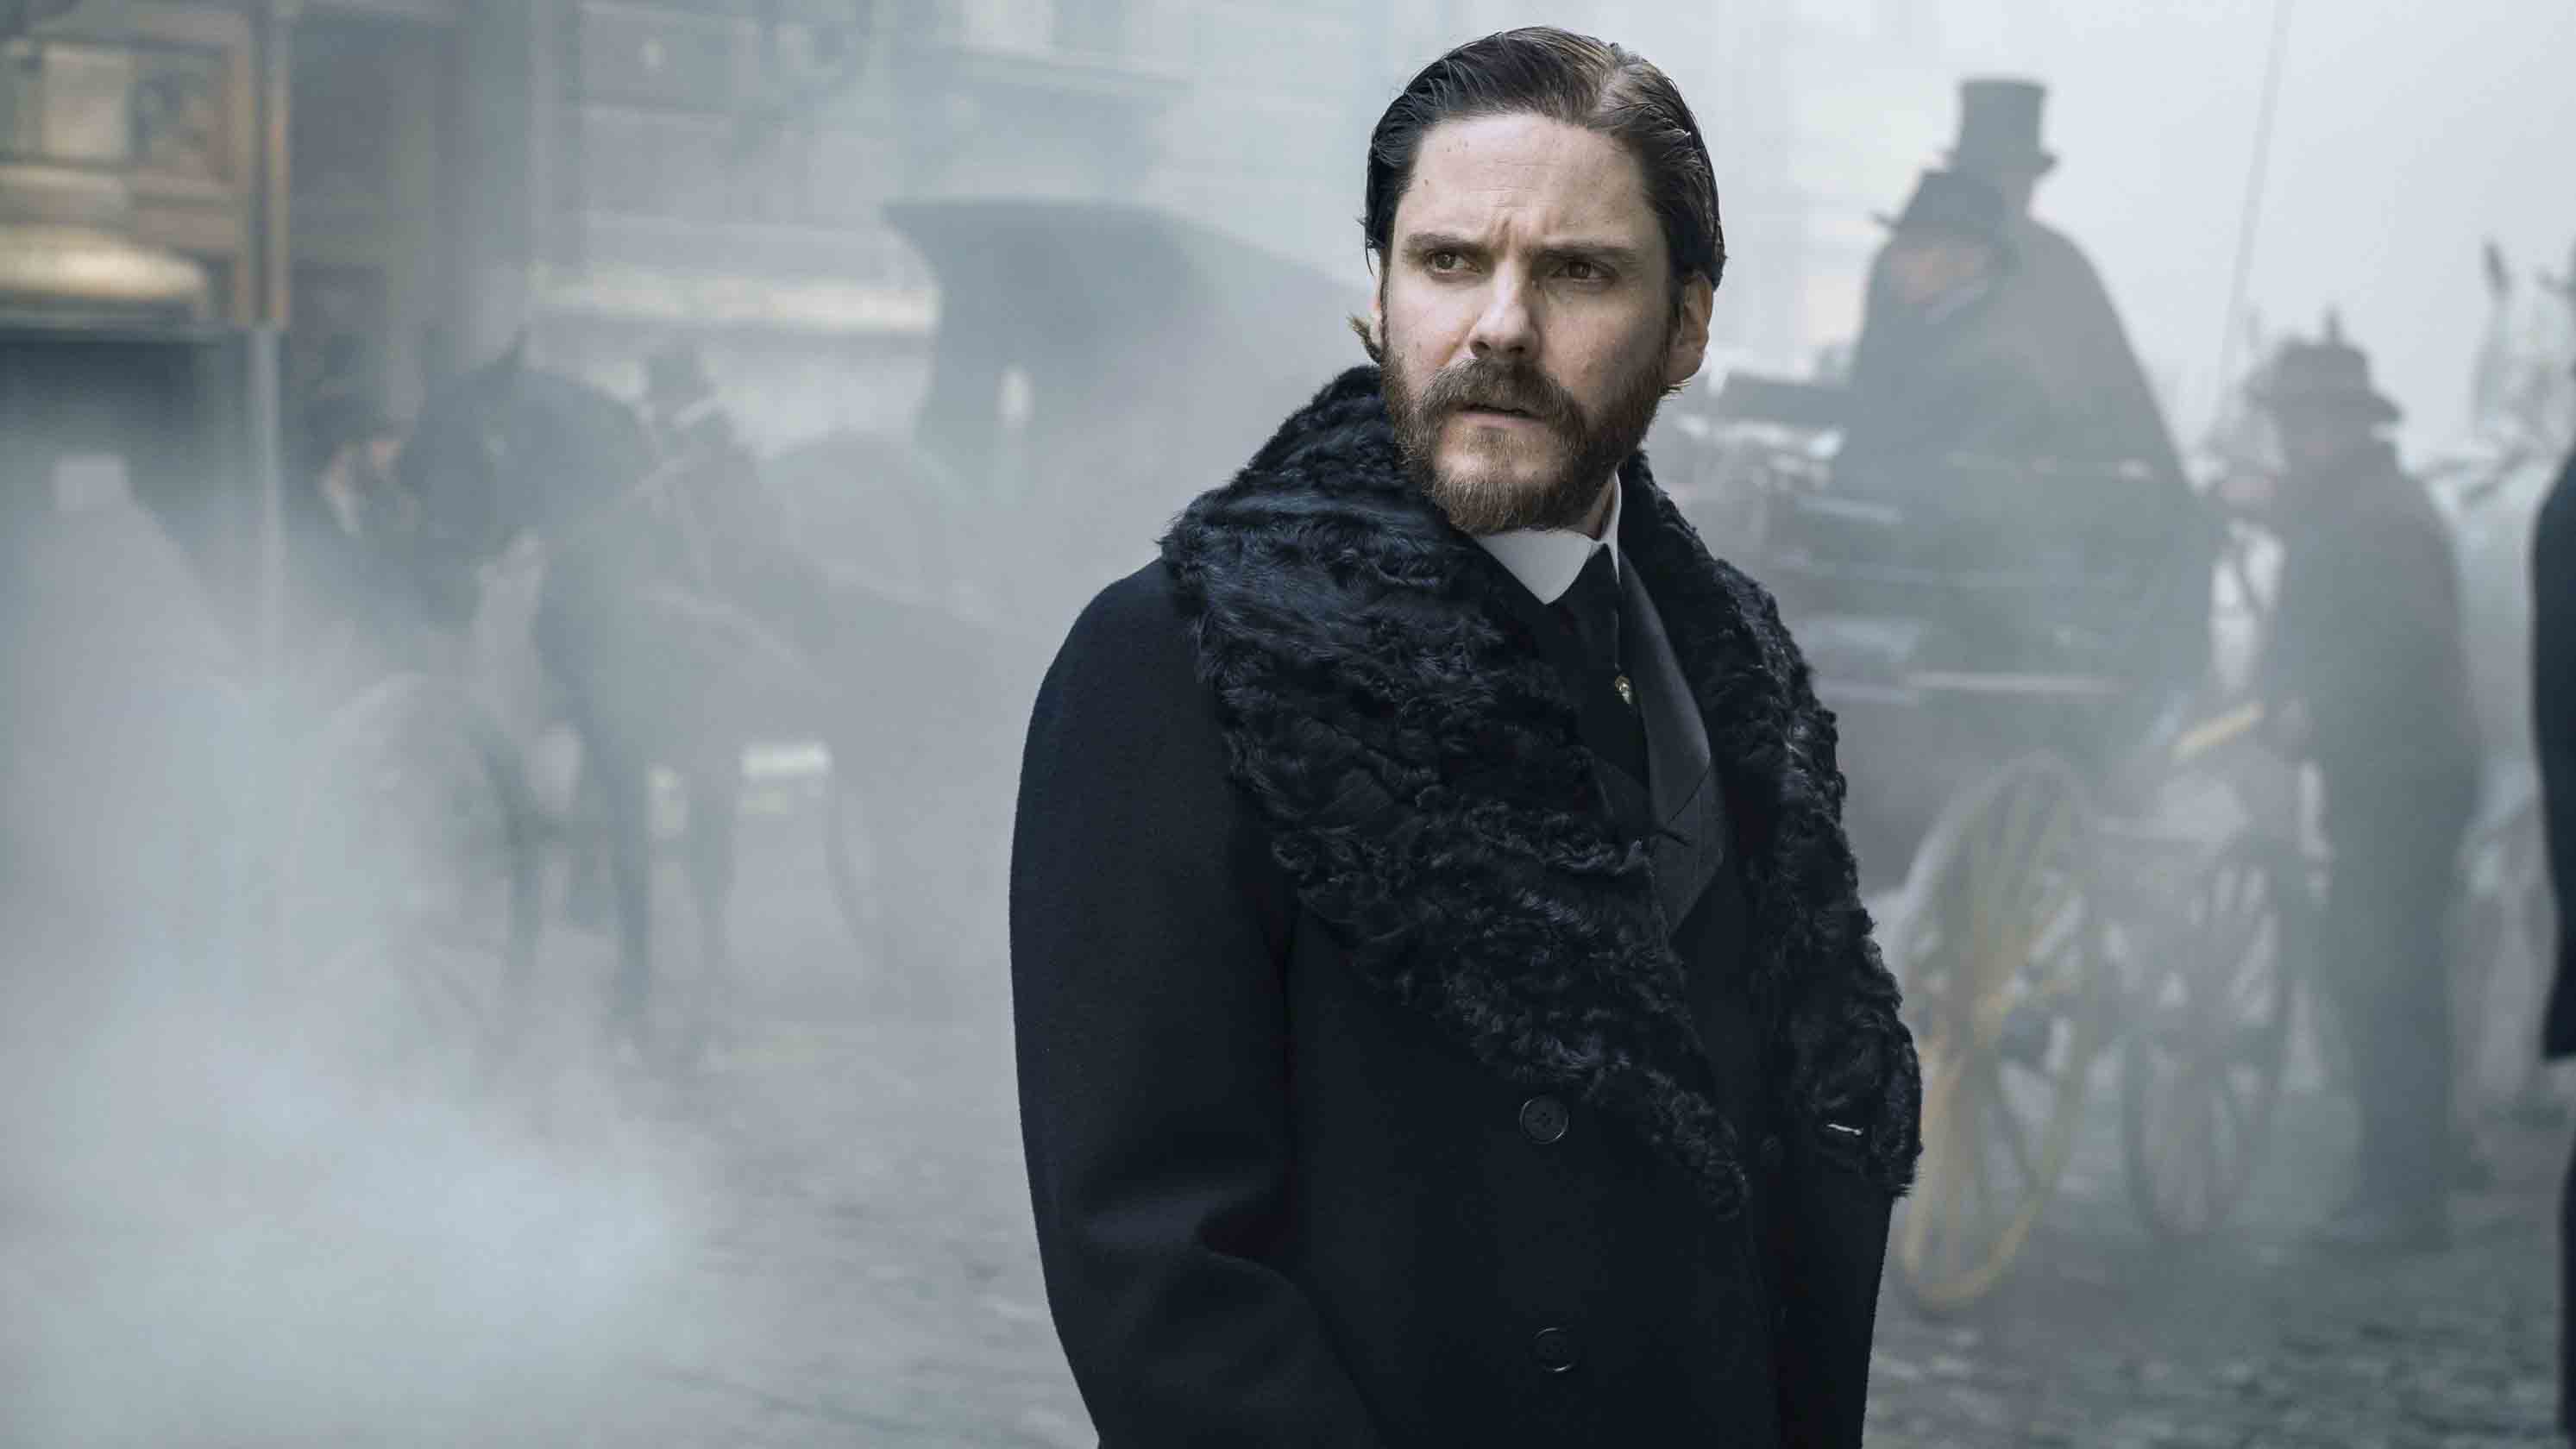 The Alienist is an American period drama television series based on the novel of the same name by Caleb Carr. The ten-episode limited series[1][2] fir...